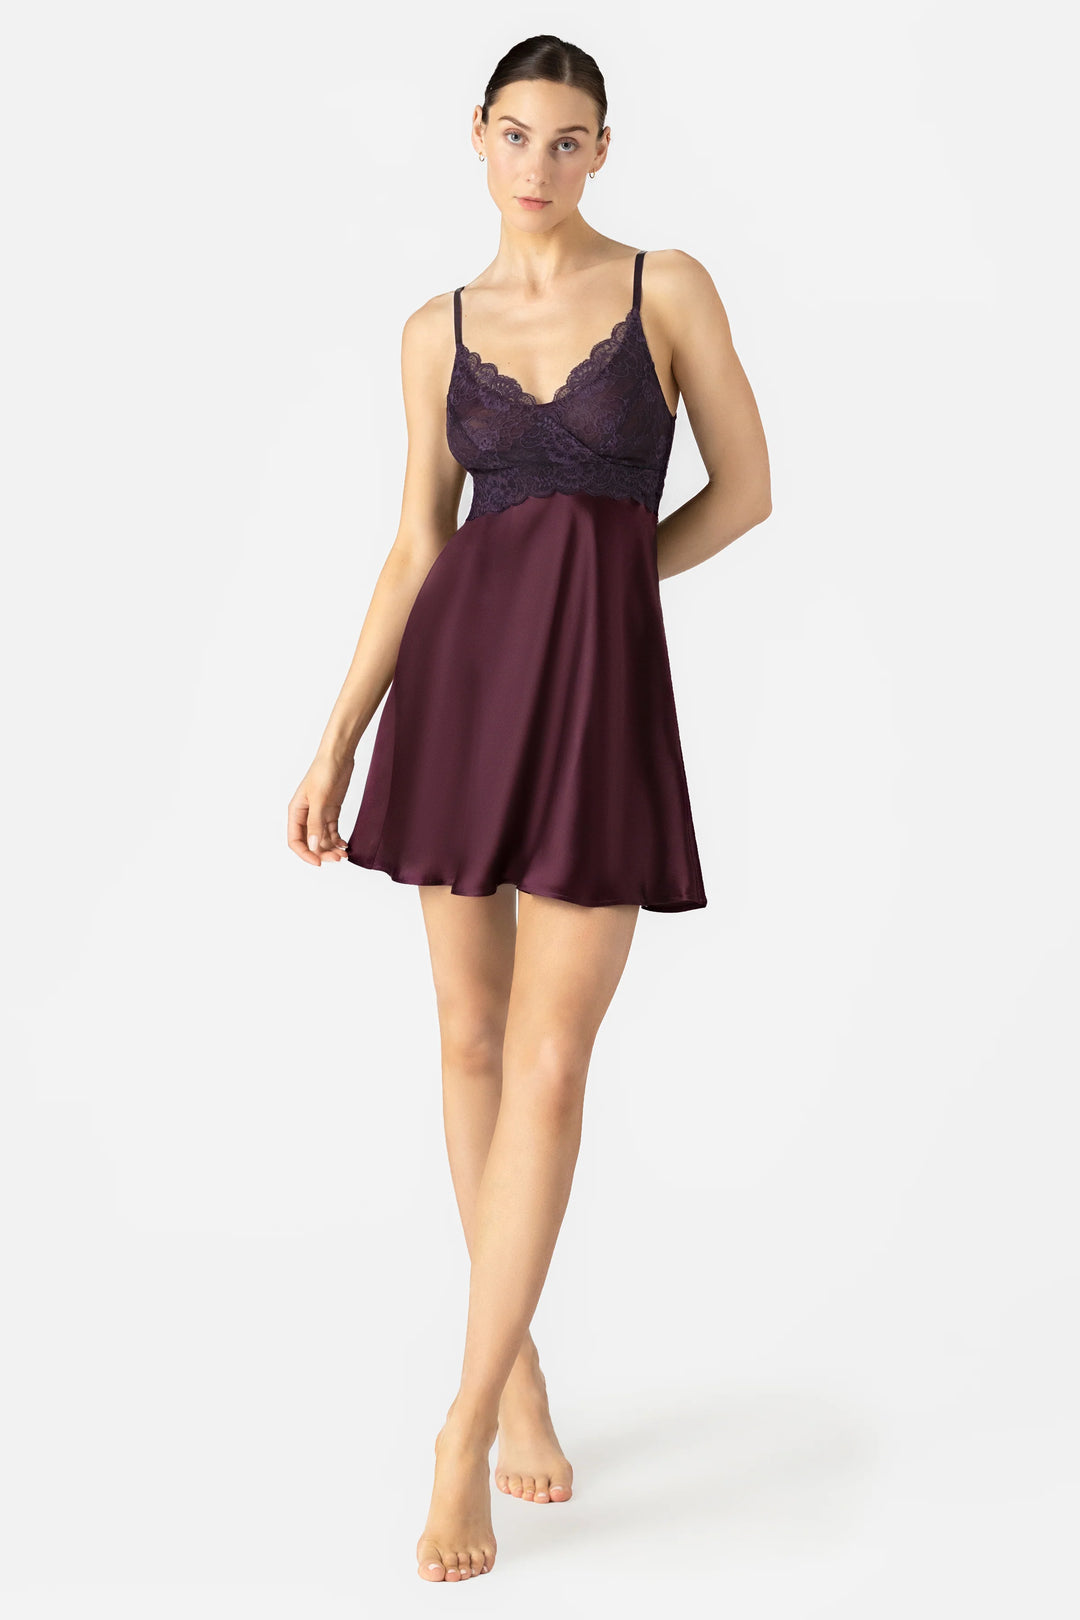 ARDENE LUSH BUST SUPPORT CROSS OVER SILK CHEMISE – Expect Lace